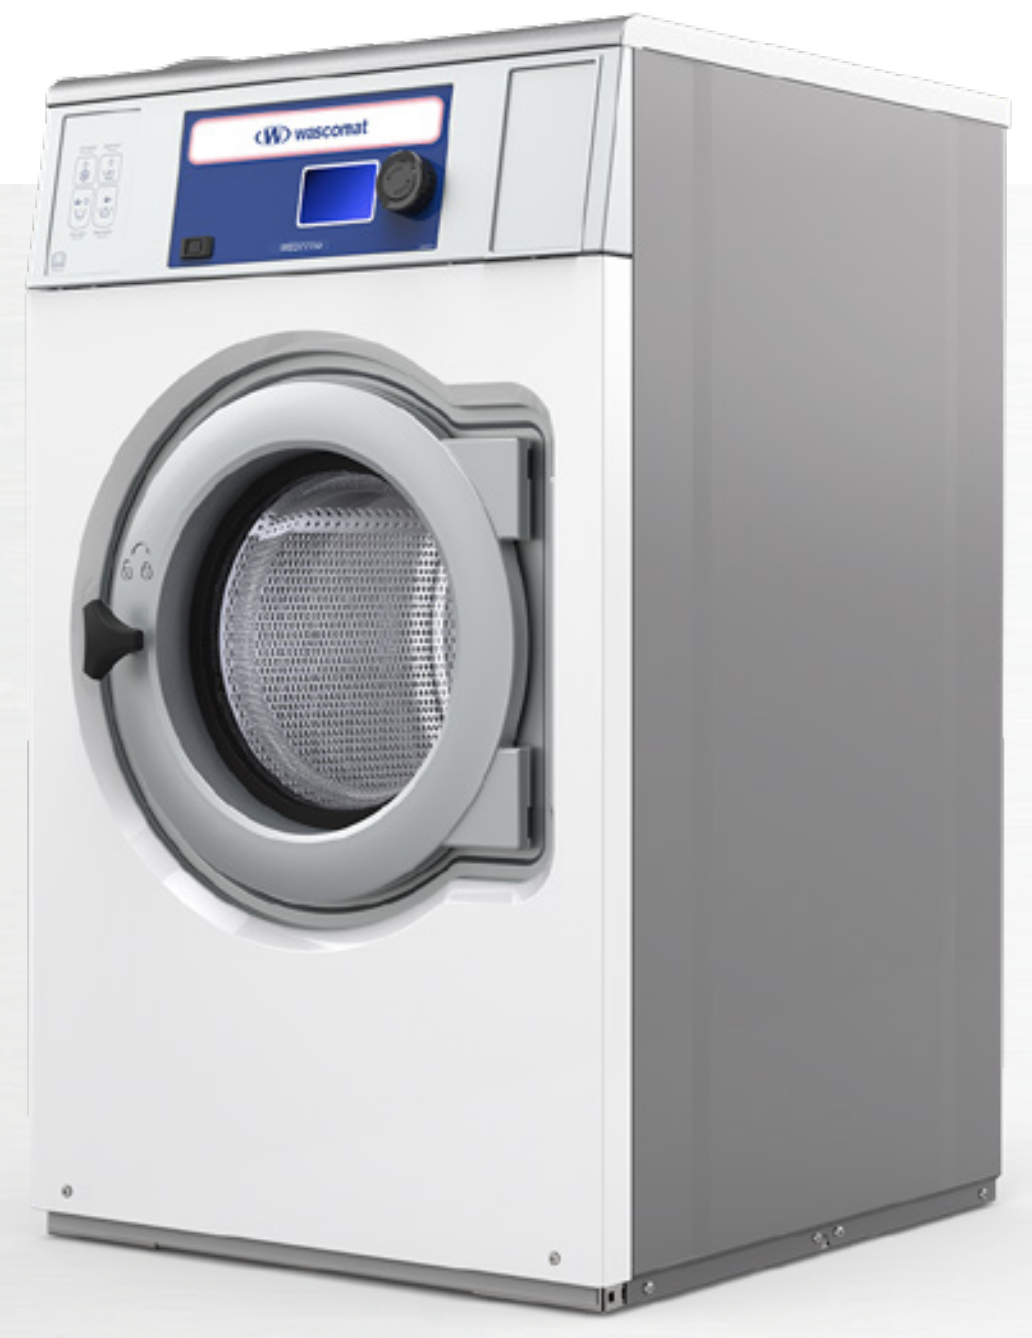 New 2022 Wascomat Wed725 Opl - Lakeside Laundry Equipment